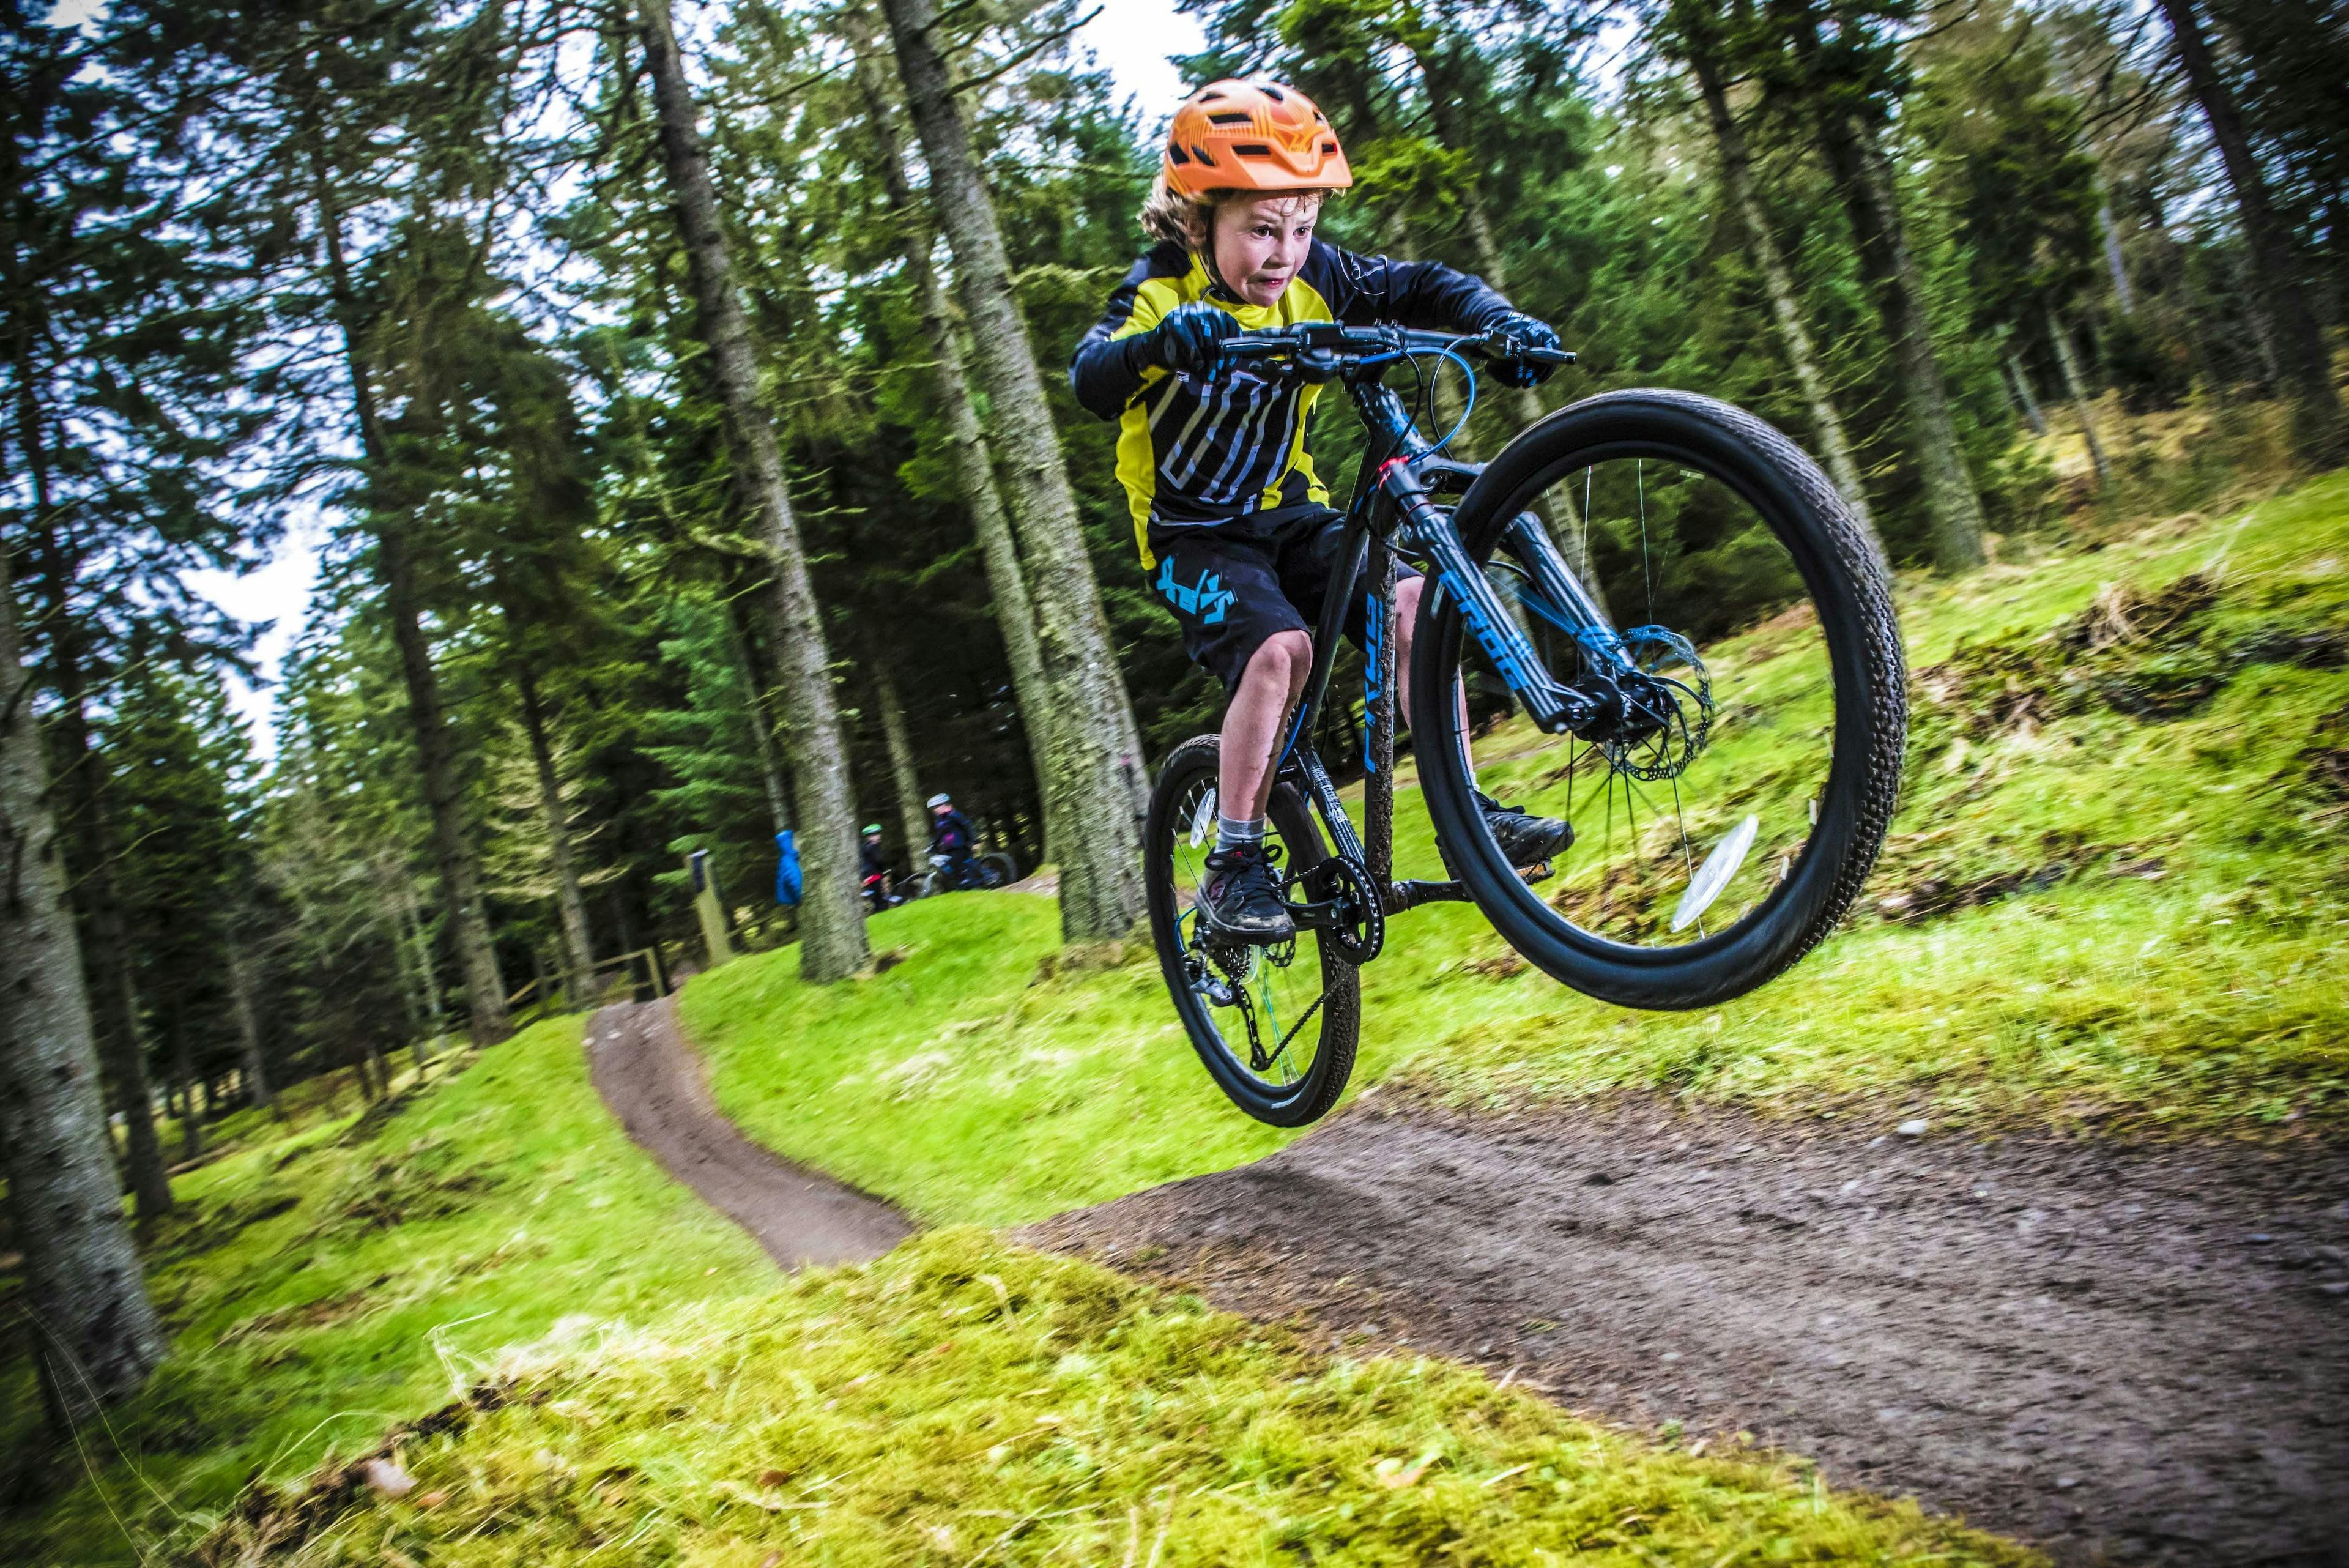 Boy performing a jump on a mountain bike course